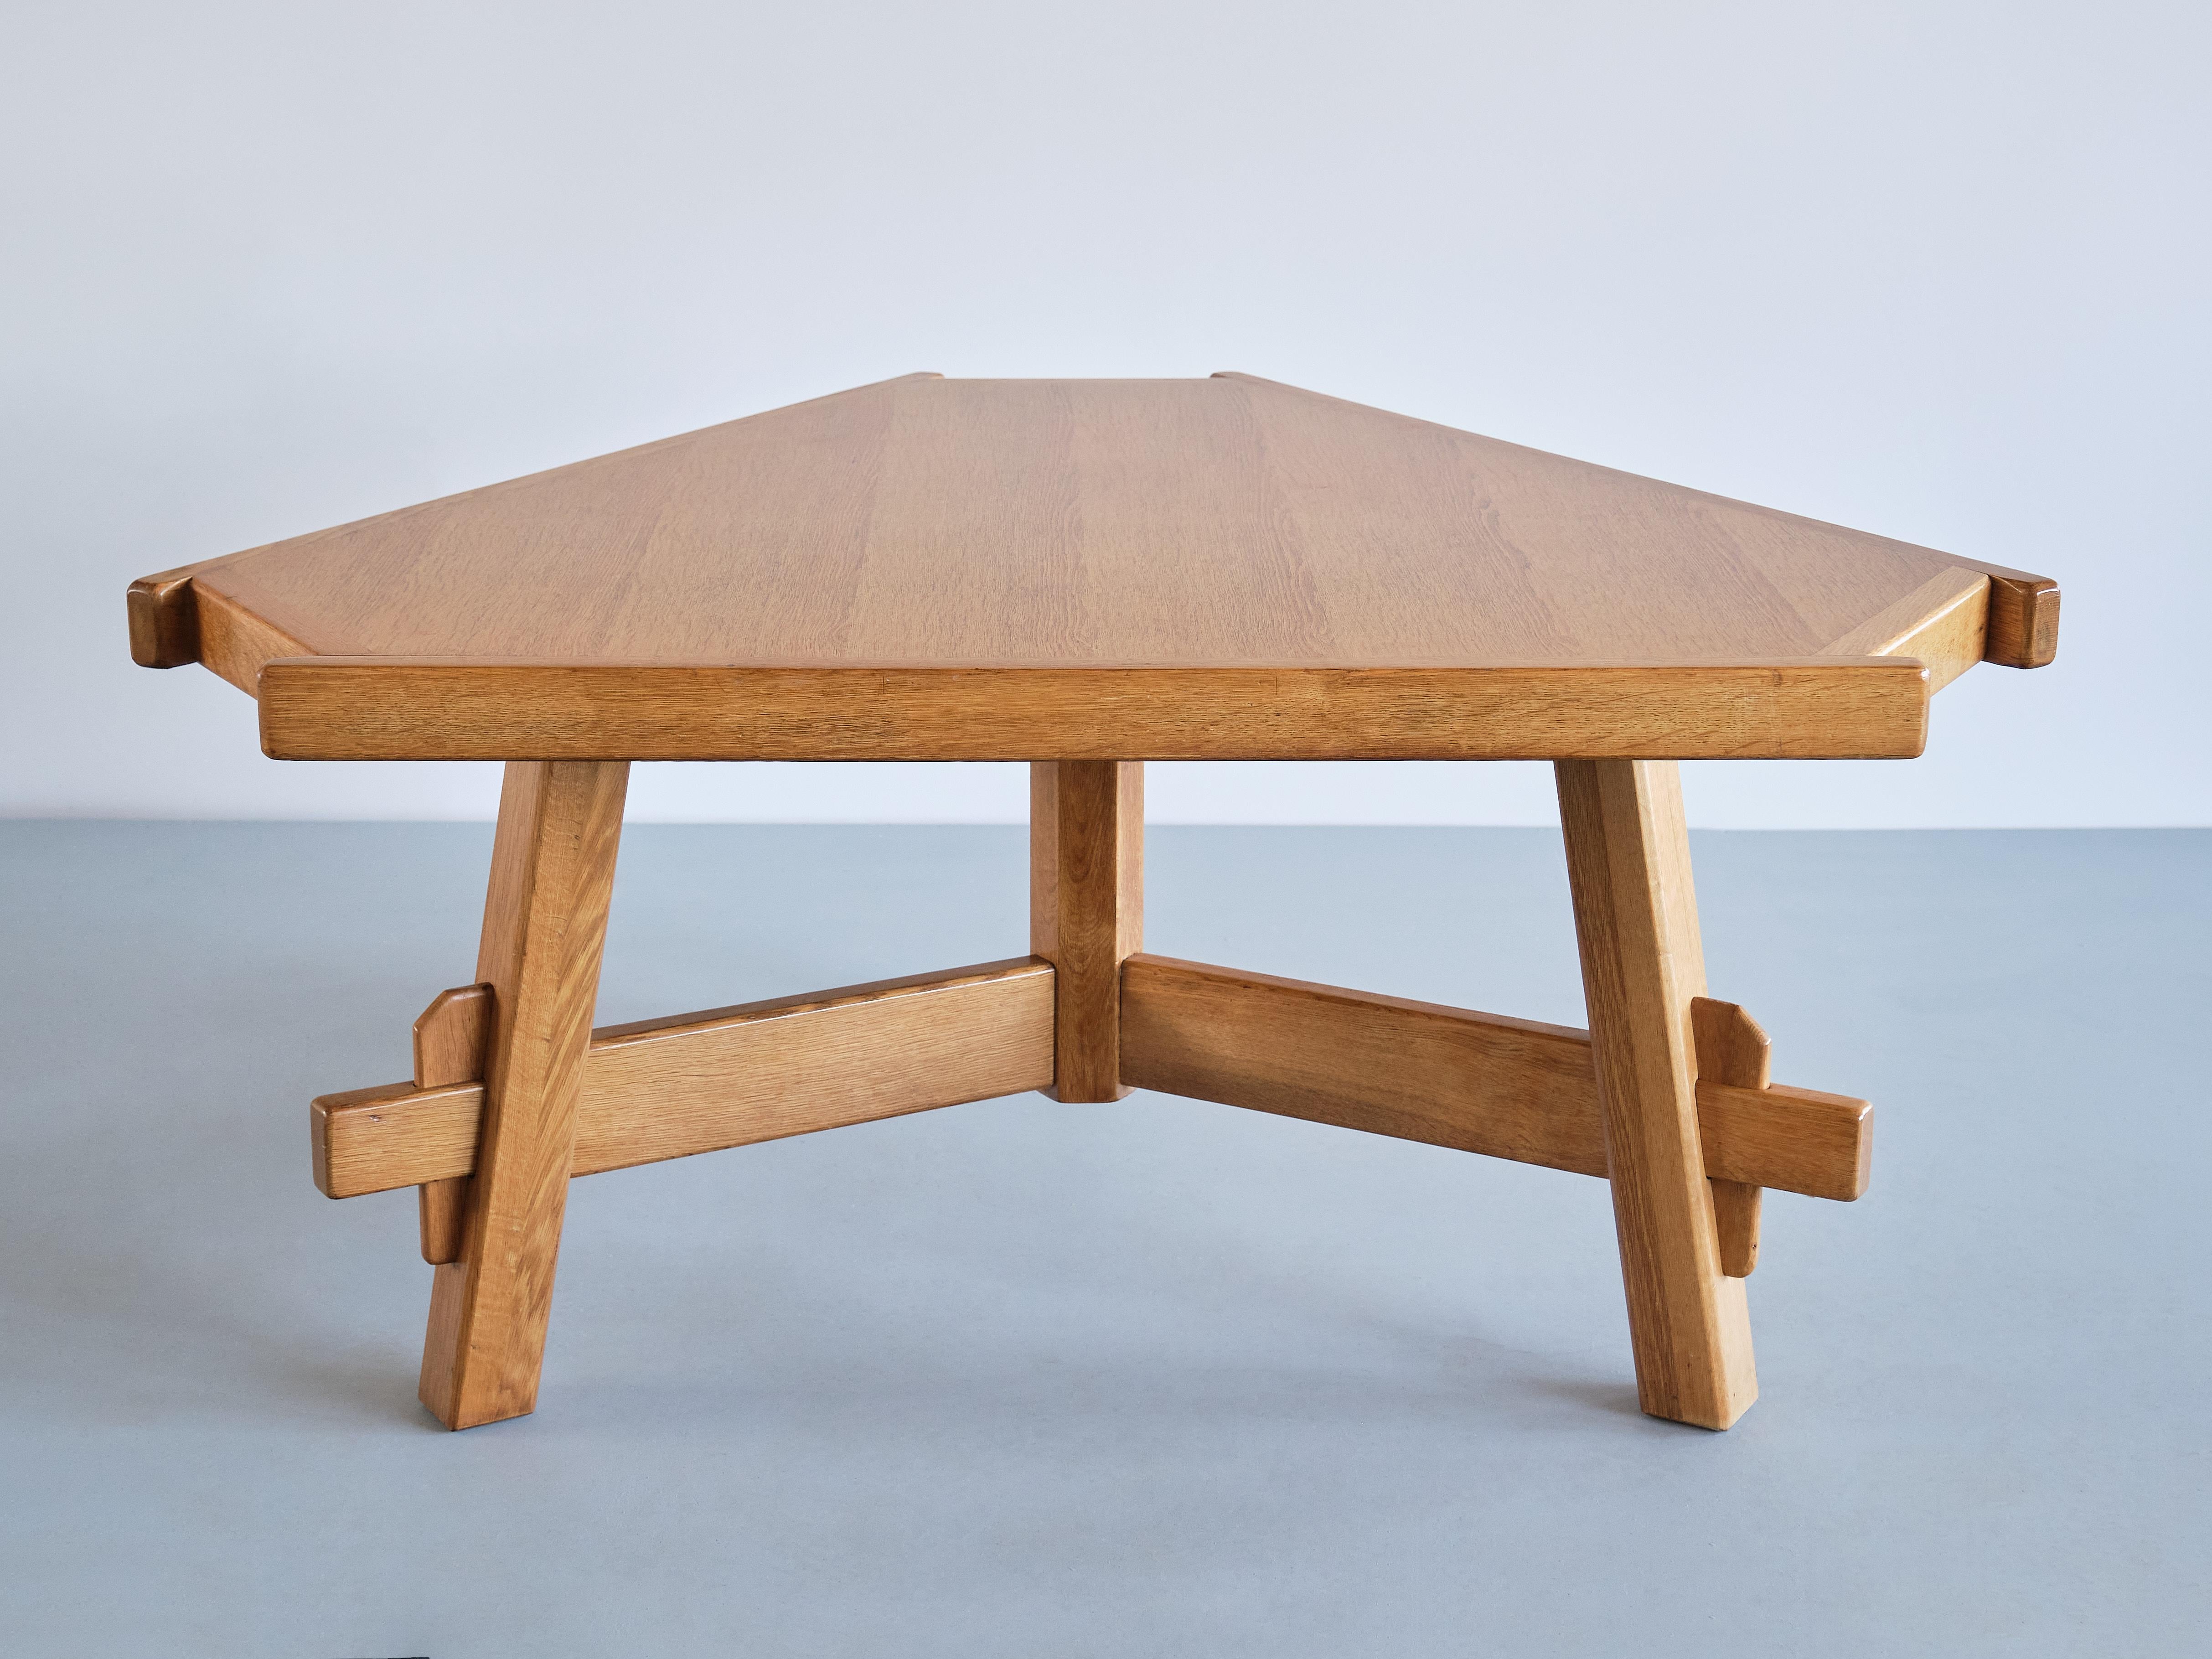 This rare geometric dining table was produced in France in the 1960s. The striking design is marked by the triangular shape of the top and frame. The table is entirely executed in a solid blonde oak wood. The top rests on three legs which are